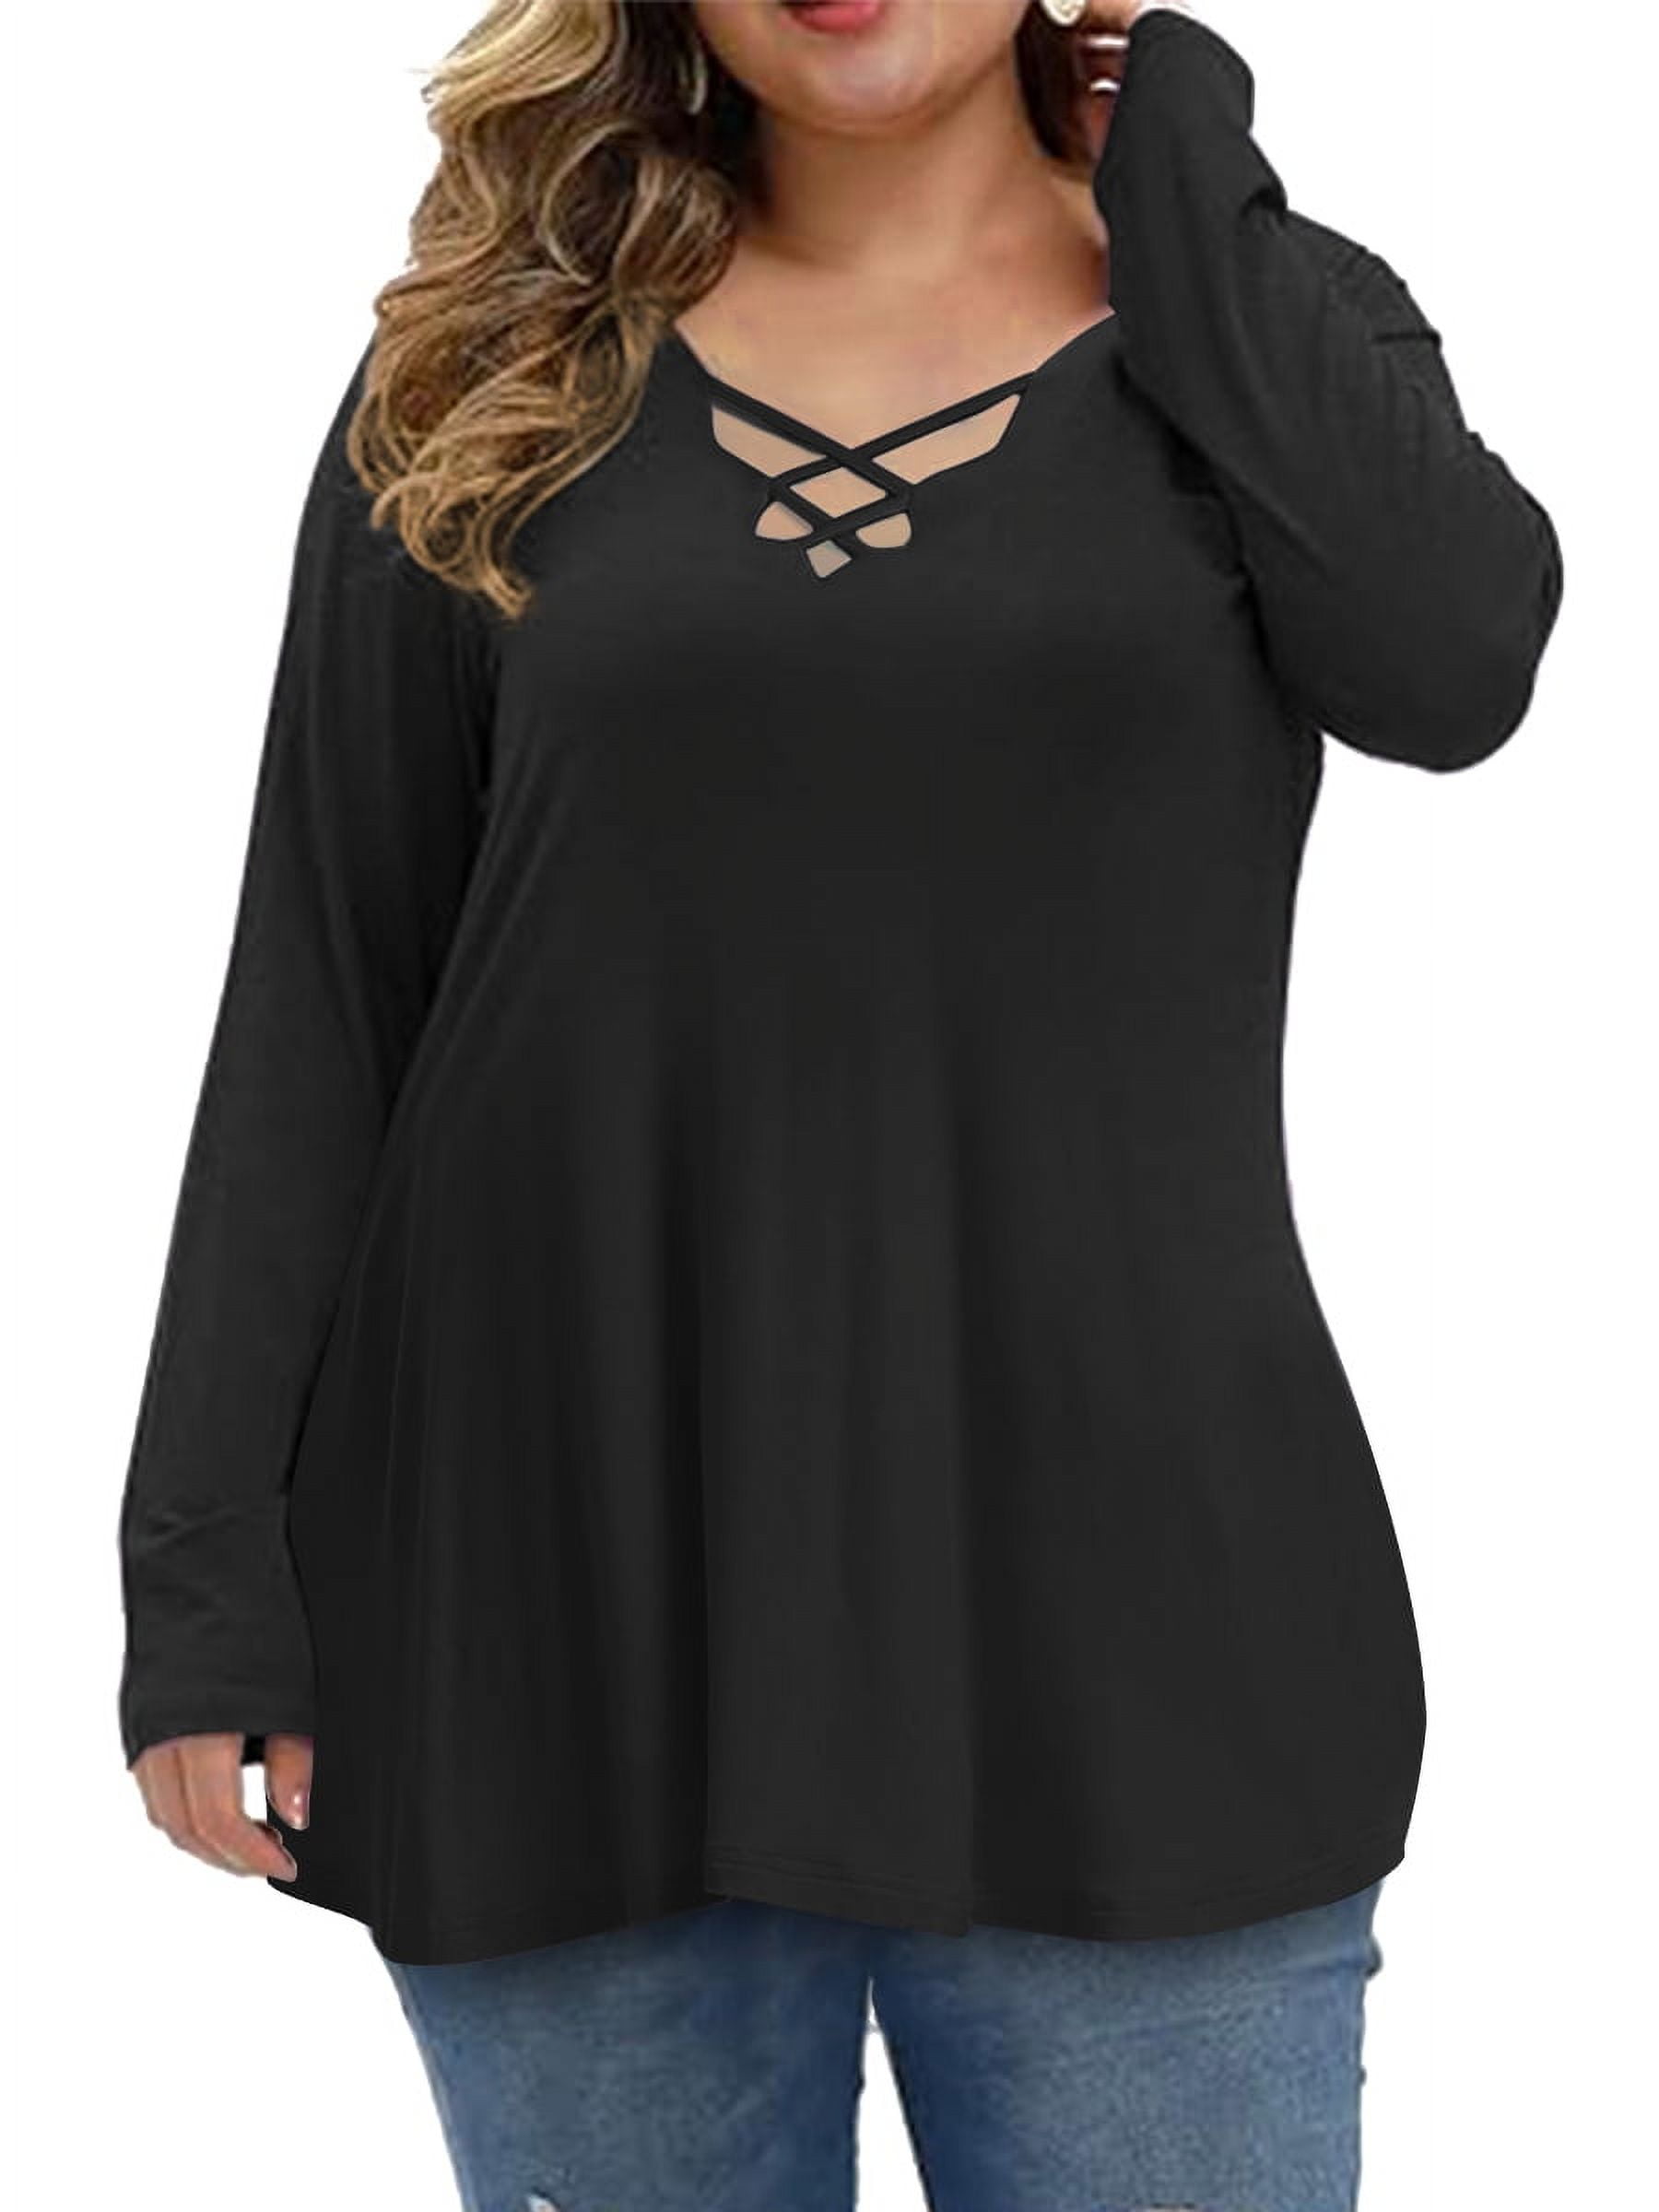 Plus Size Sexy V-neck Spring Autumn Blouse Women Long Sleeve Black Sheath  Work Office Lace Top Female Large Size T-shirt Tee 6XL